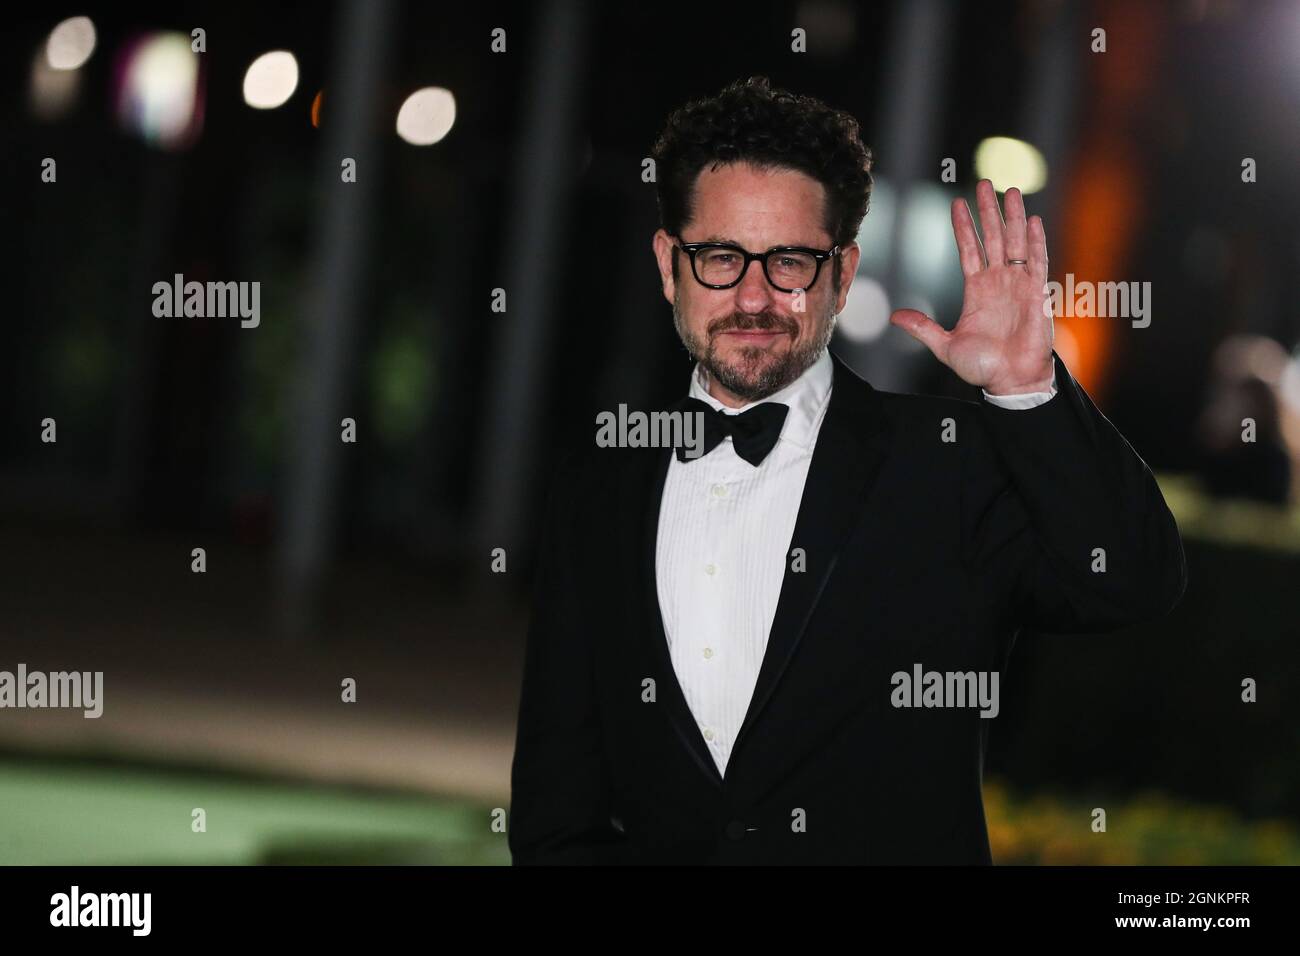 LOS ANGELES, CALIFORNIA, USA - SEPTEMBER 25: Director J.J. Abrams arrives at the Academy Museum of Motion Pictures Opening Gala held at the Academy Museum of Motion Pictures on September 25, 2021 in Los Angeles, California, United States. (Photo by Xavier Collin/Image Press Agency/Sipa USA) Stock Photo